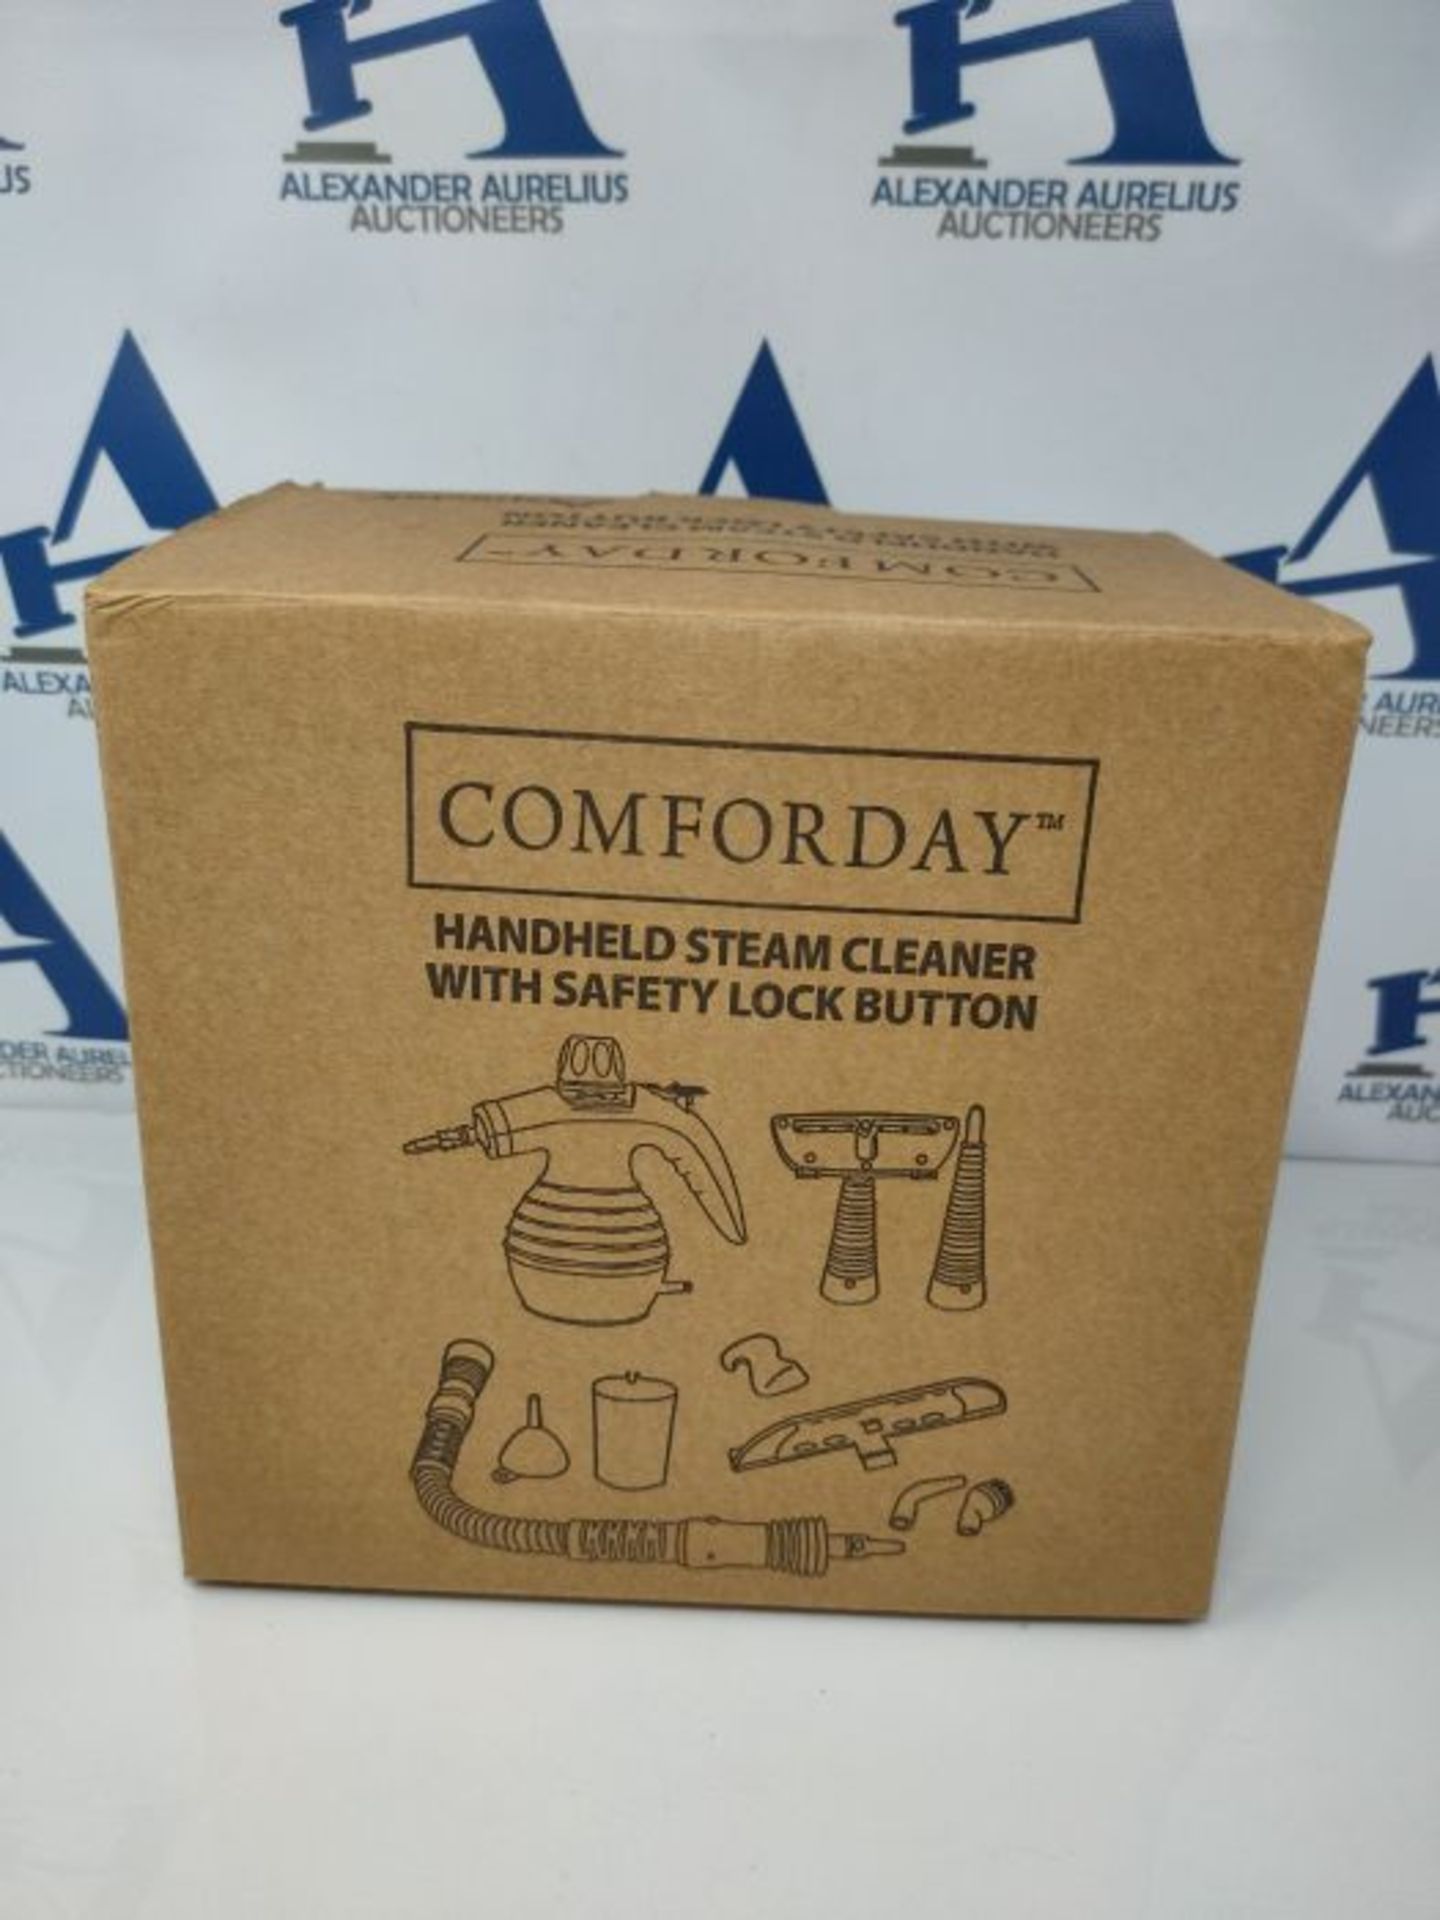 Comforday Multi-Purpose Handheld Steam Cleaner 9-Piece Accessories for Multi-Surface S - Image 2 of 2